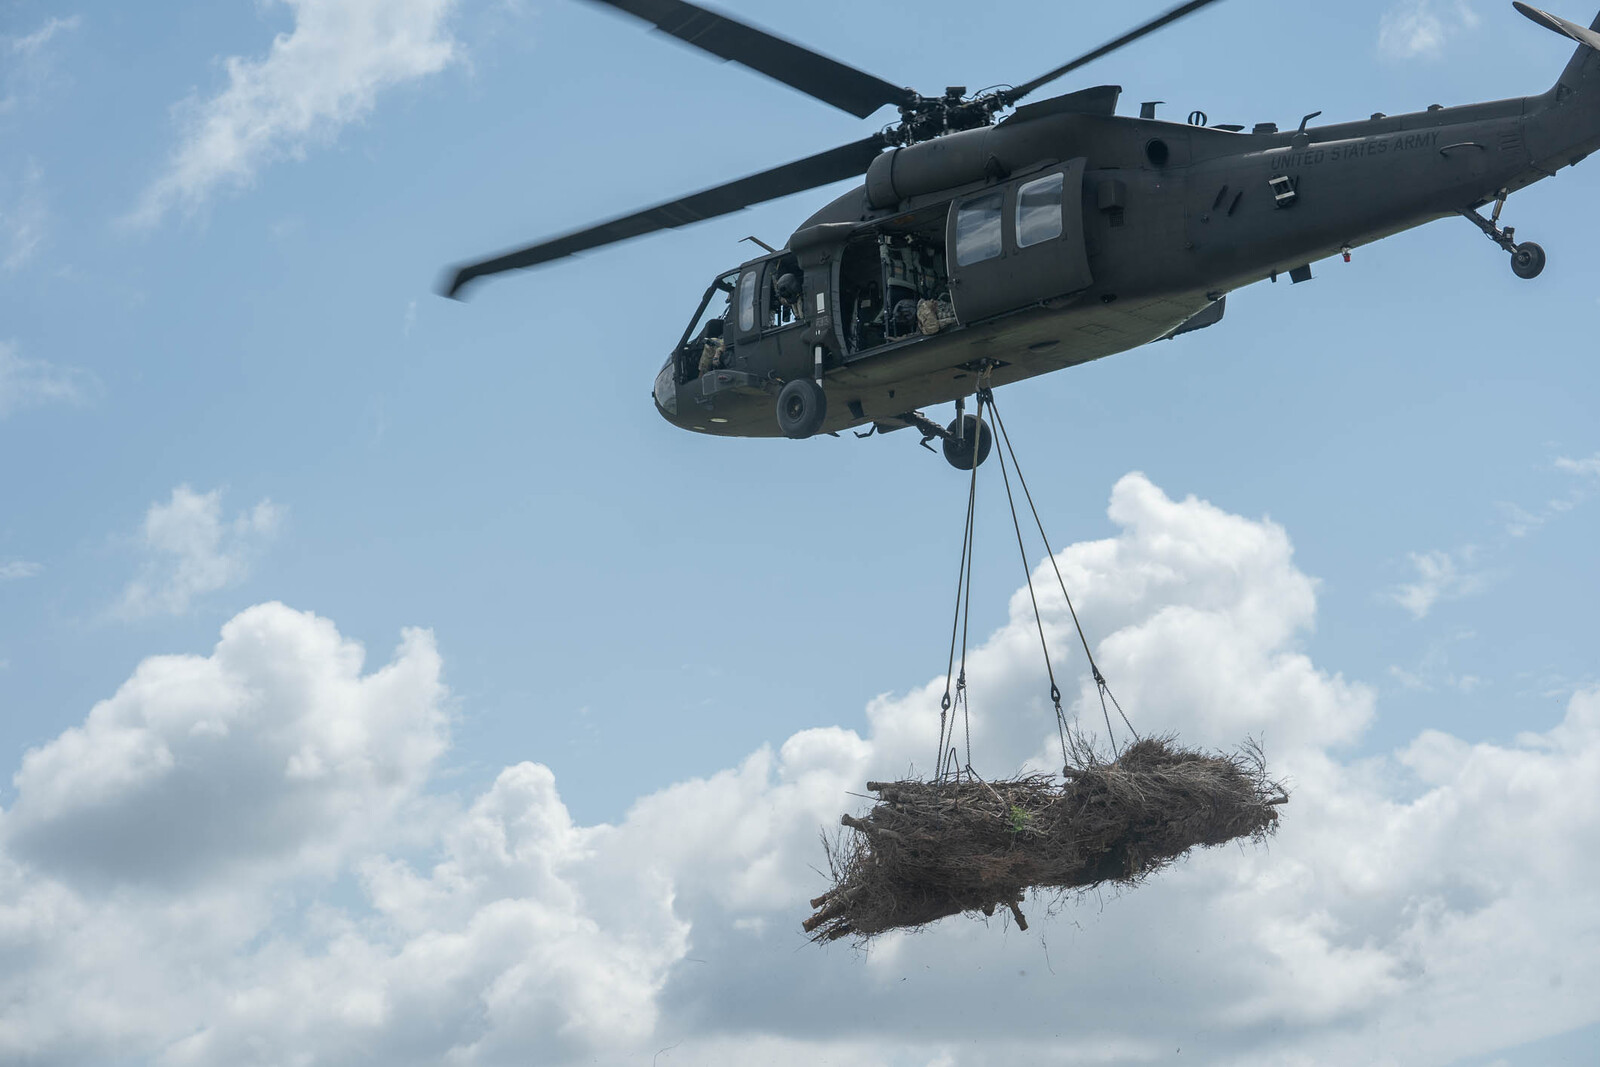 Louisiana National Guard uses old Christmas trees for emergency training